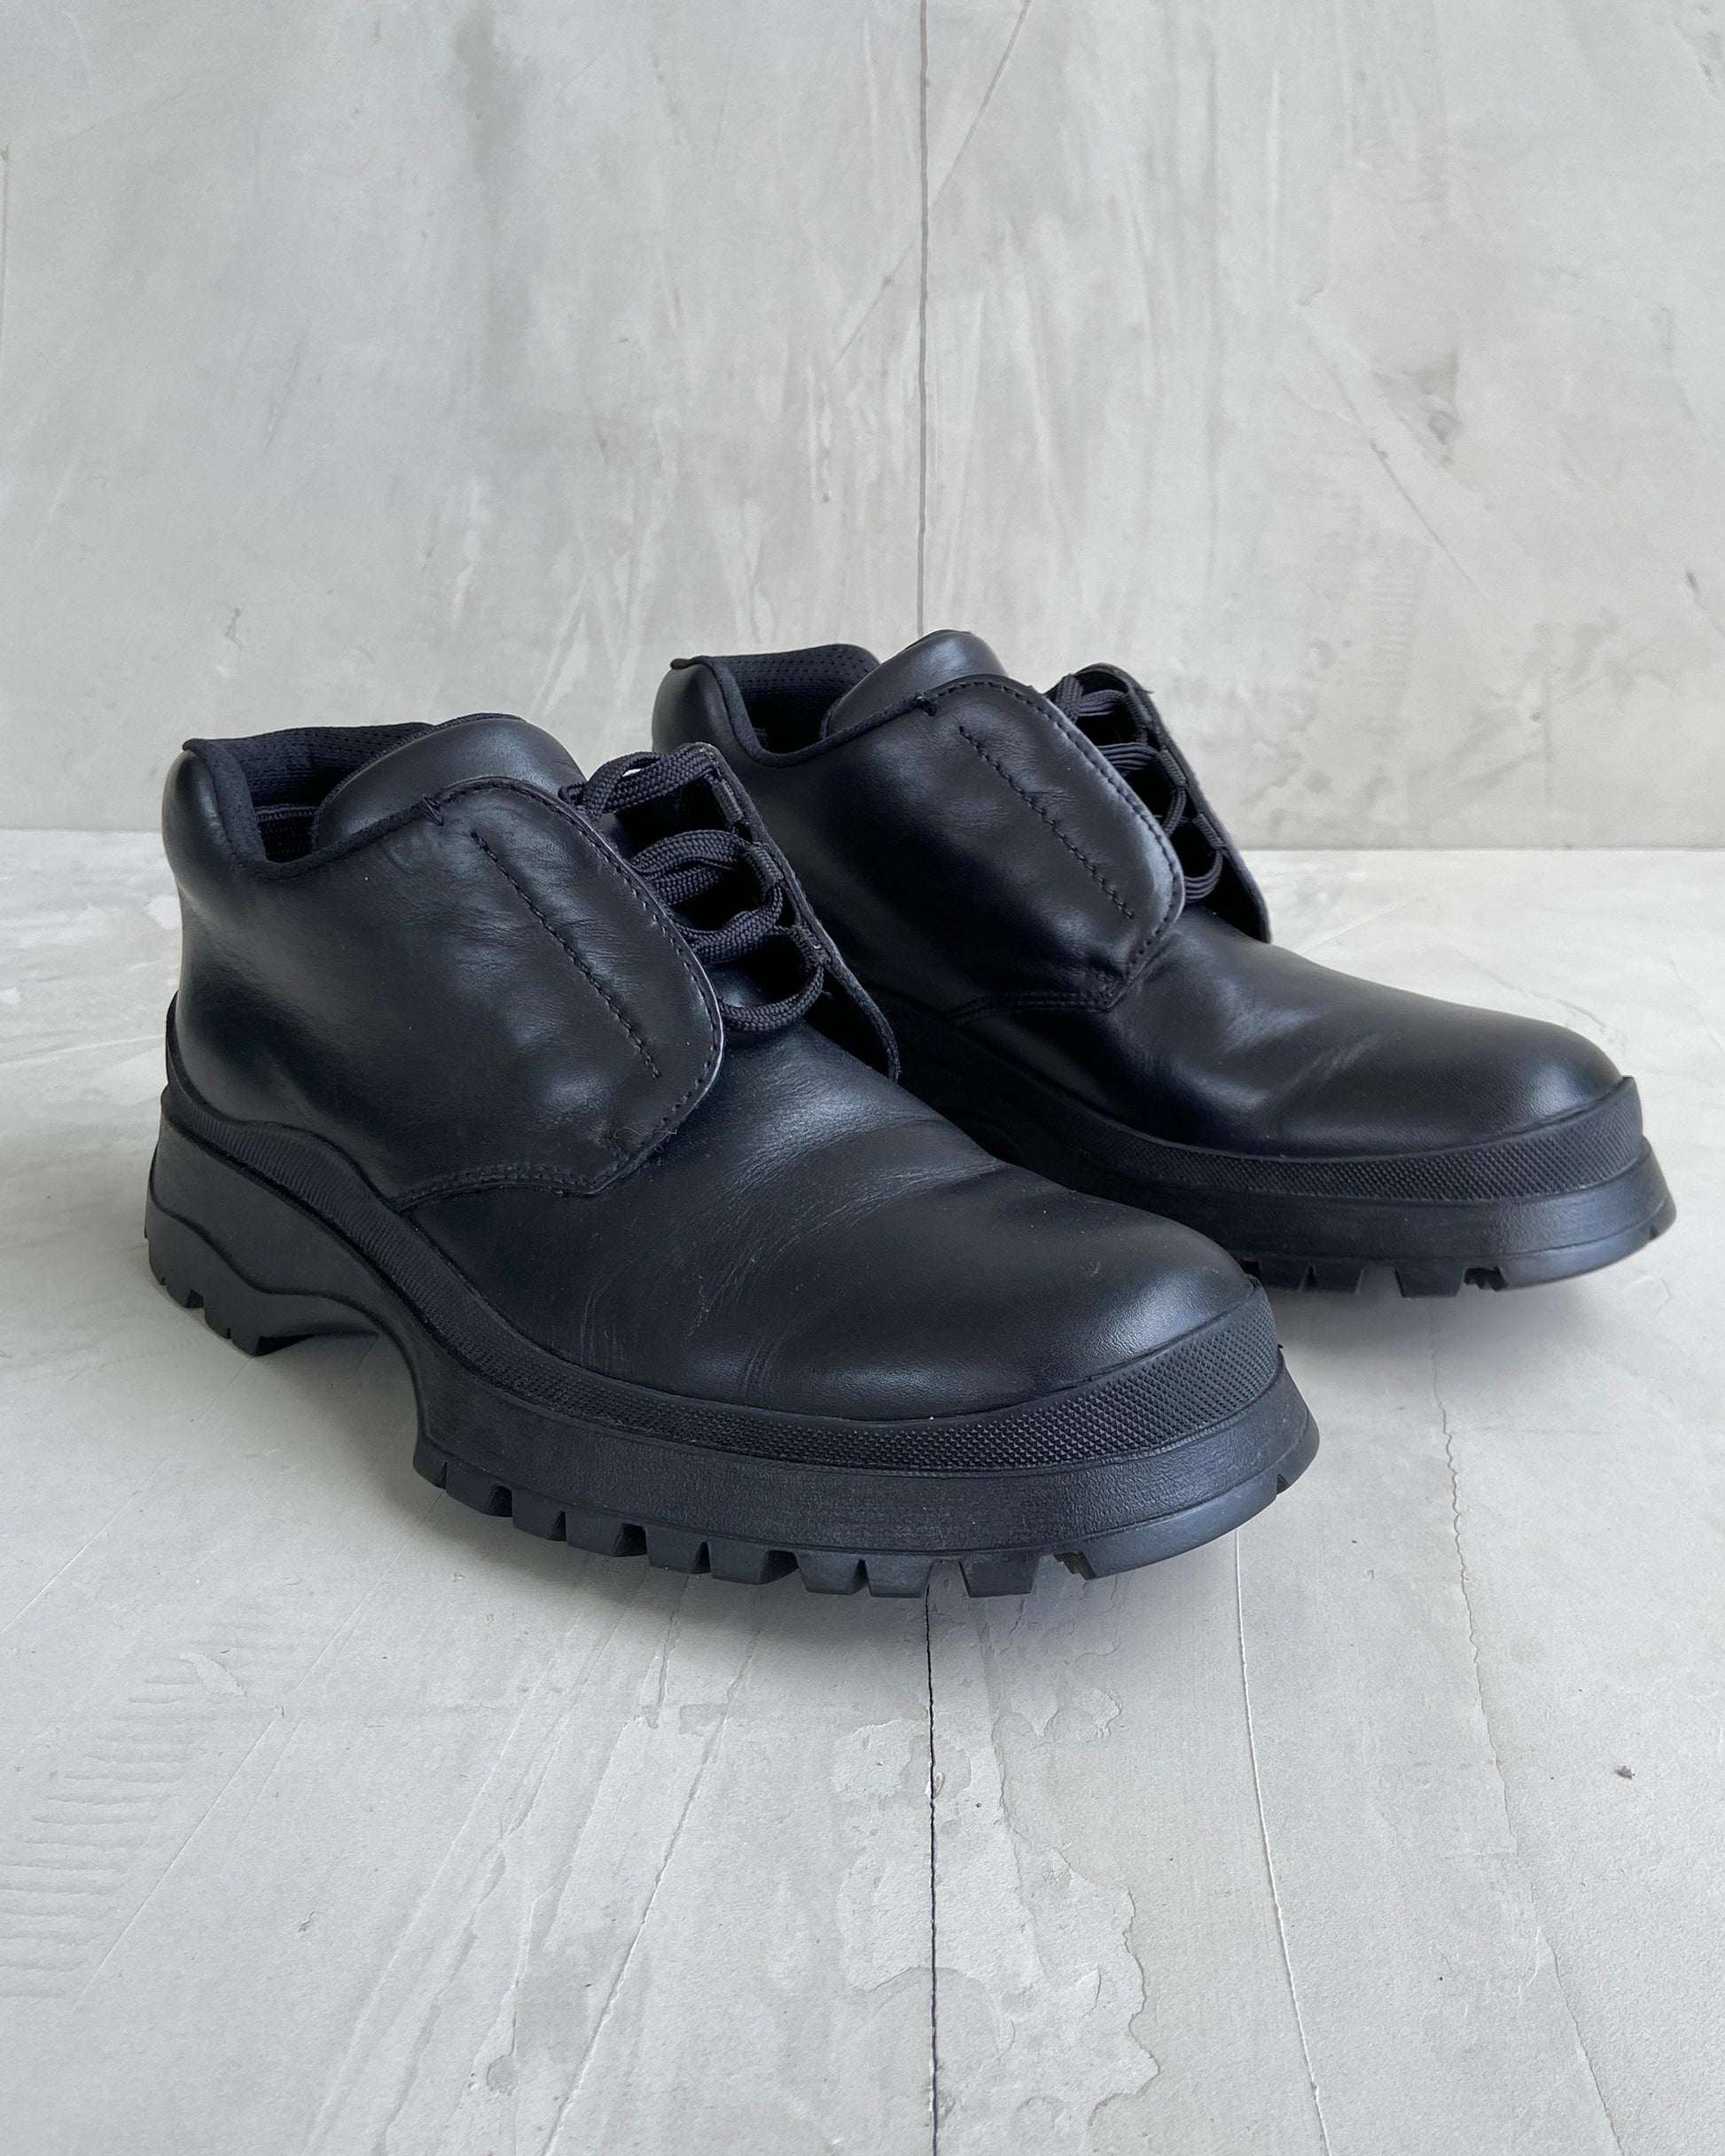 PRADA SPORT FW03 VIBRAM SOLE LEATHER SHOES - UK 7.5 we - Known Source